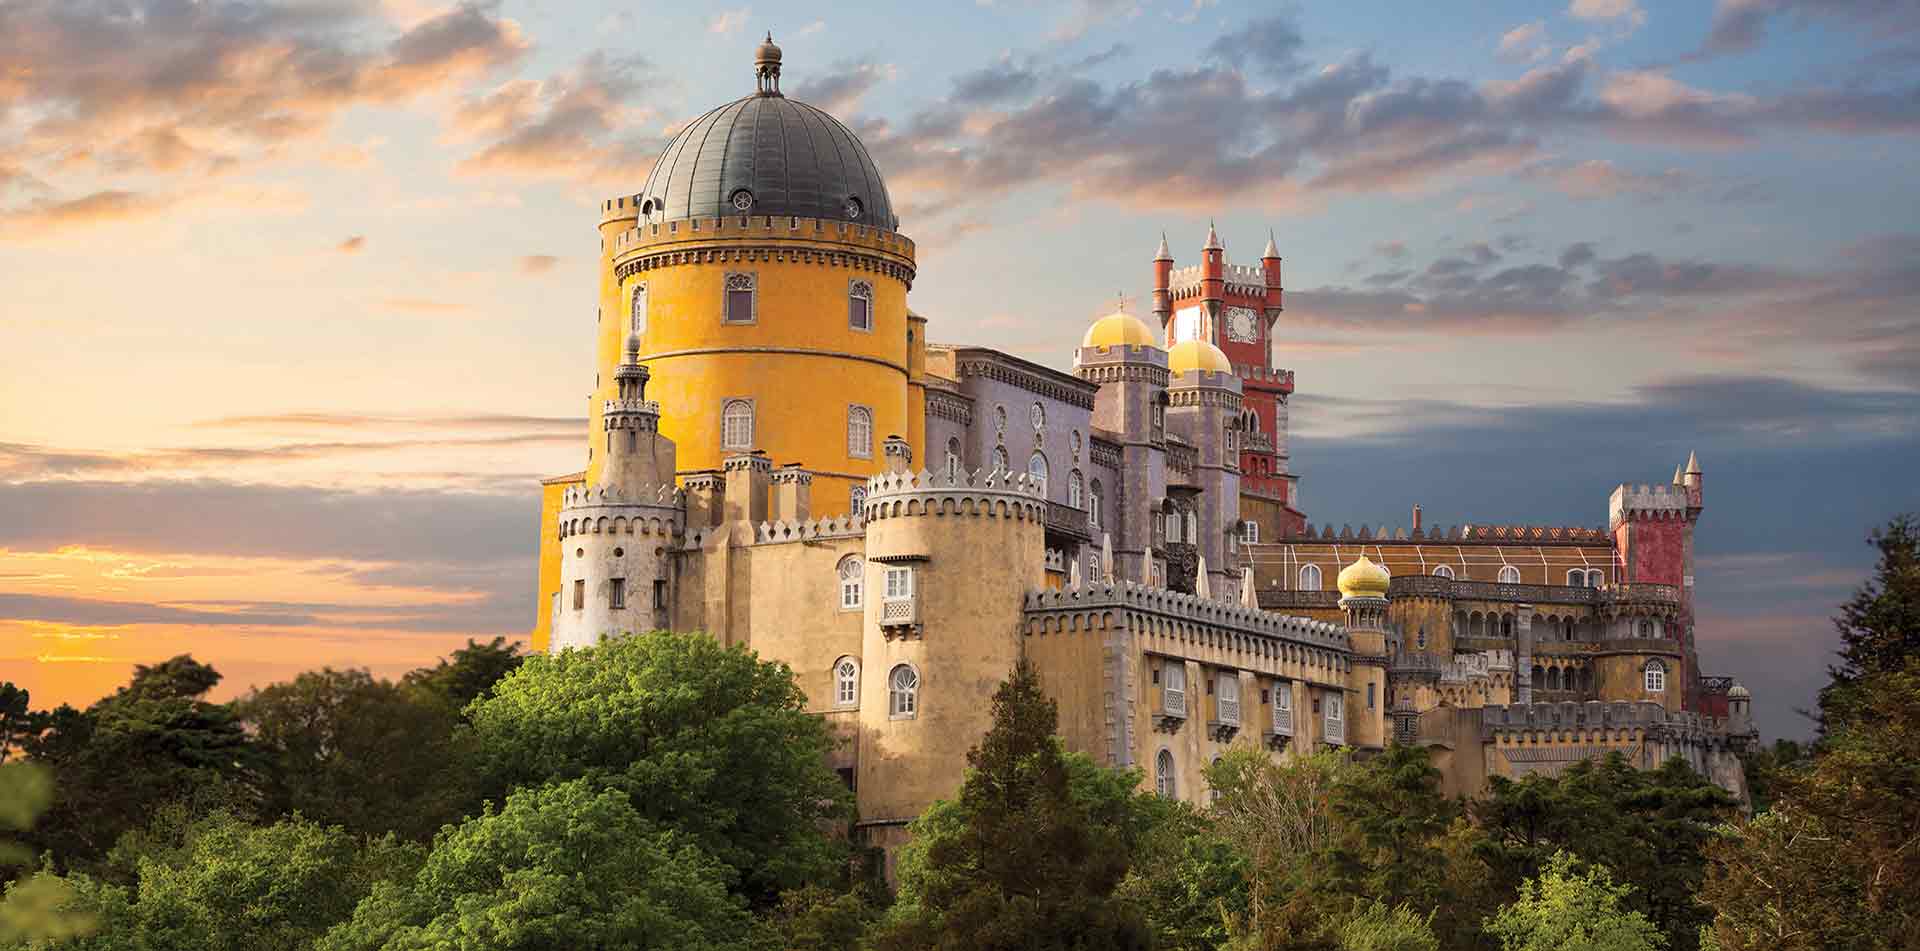 Enjoy 'only with Classic Journeys' access to Pena National Palace when its closed to the public